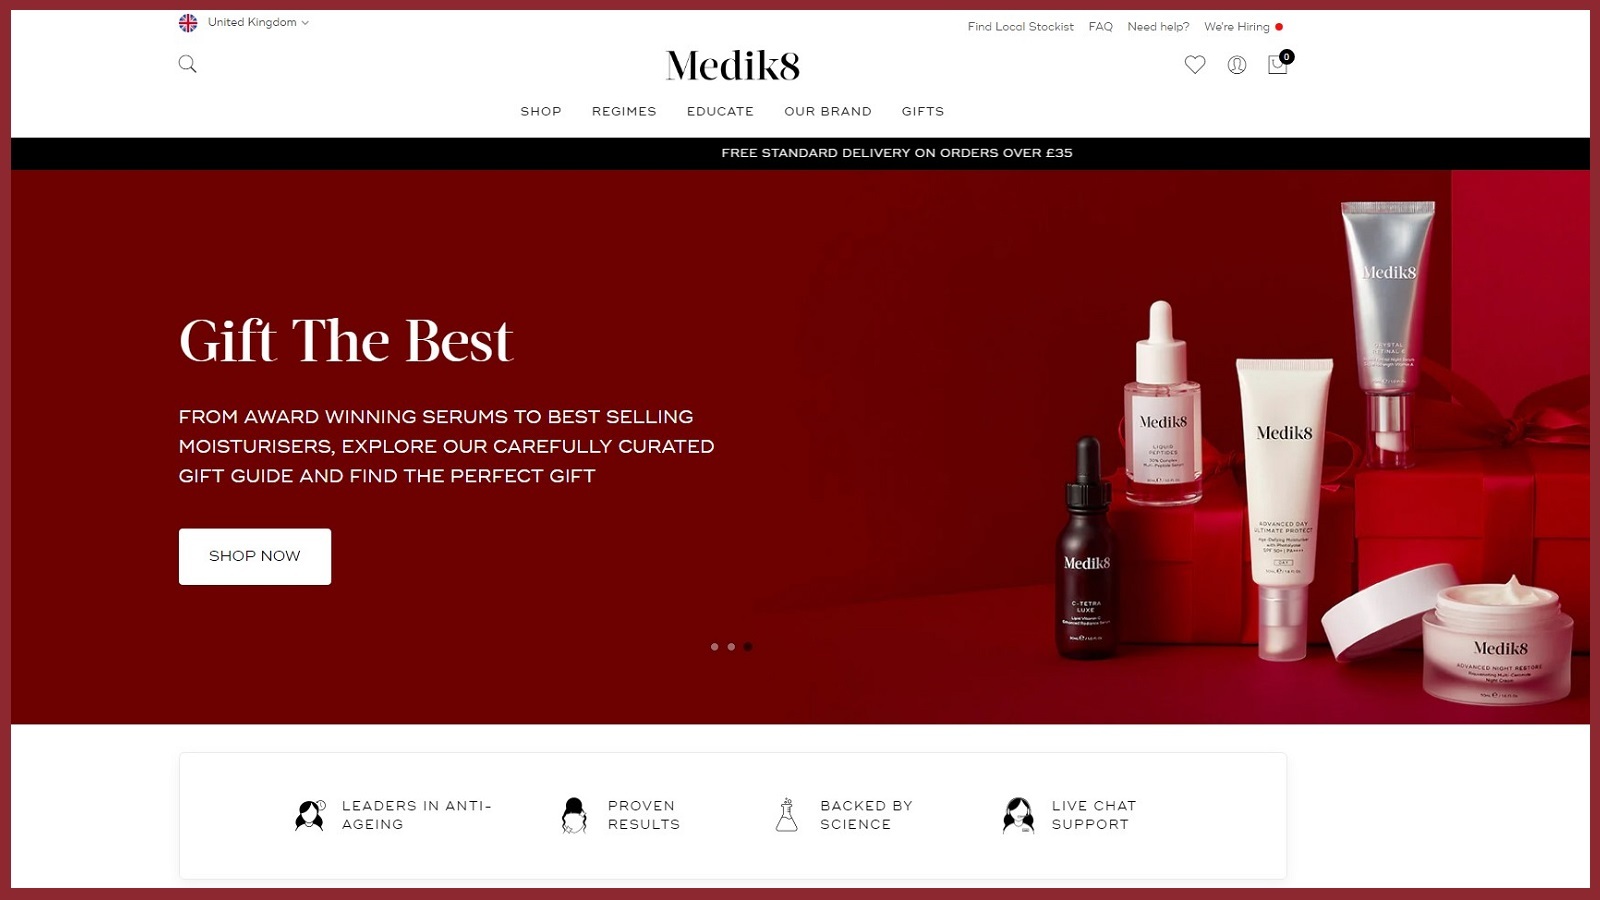 Medik8 Review: Why This Brand So Popular Online?